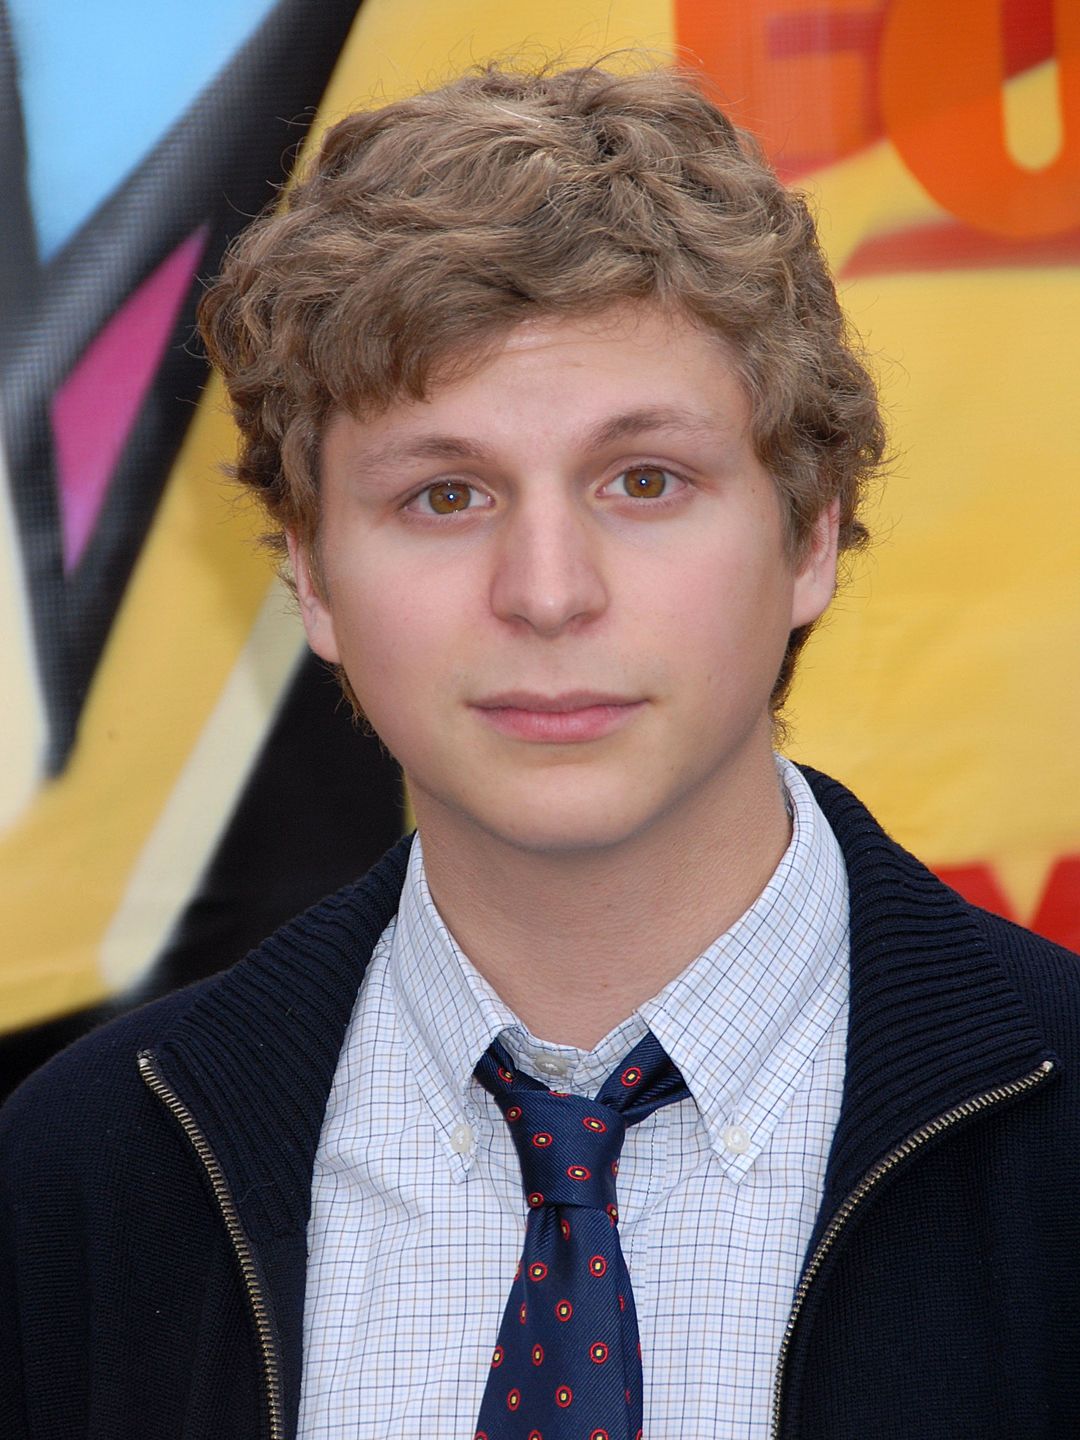 Michael Cera who is his father